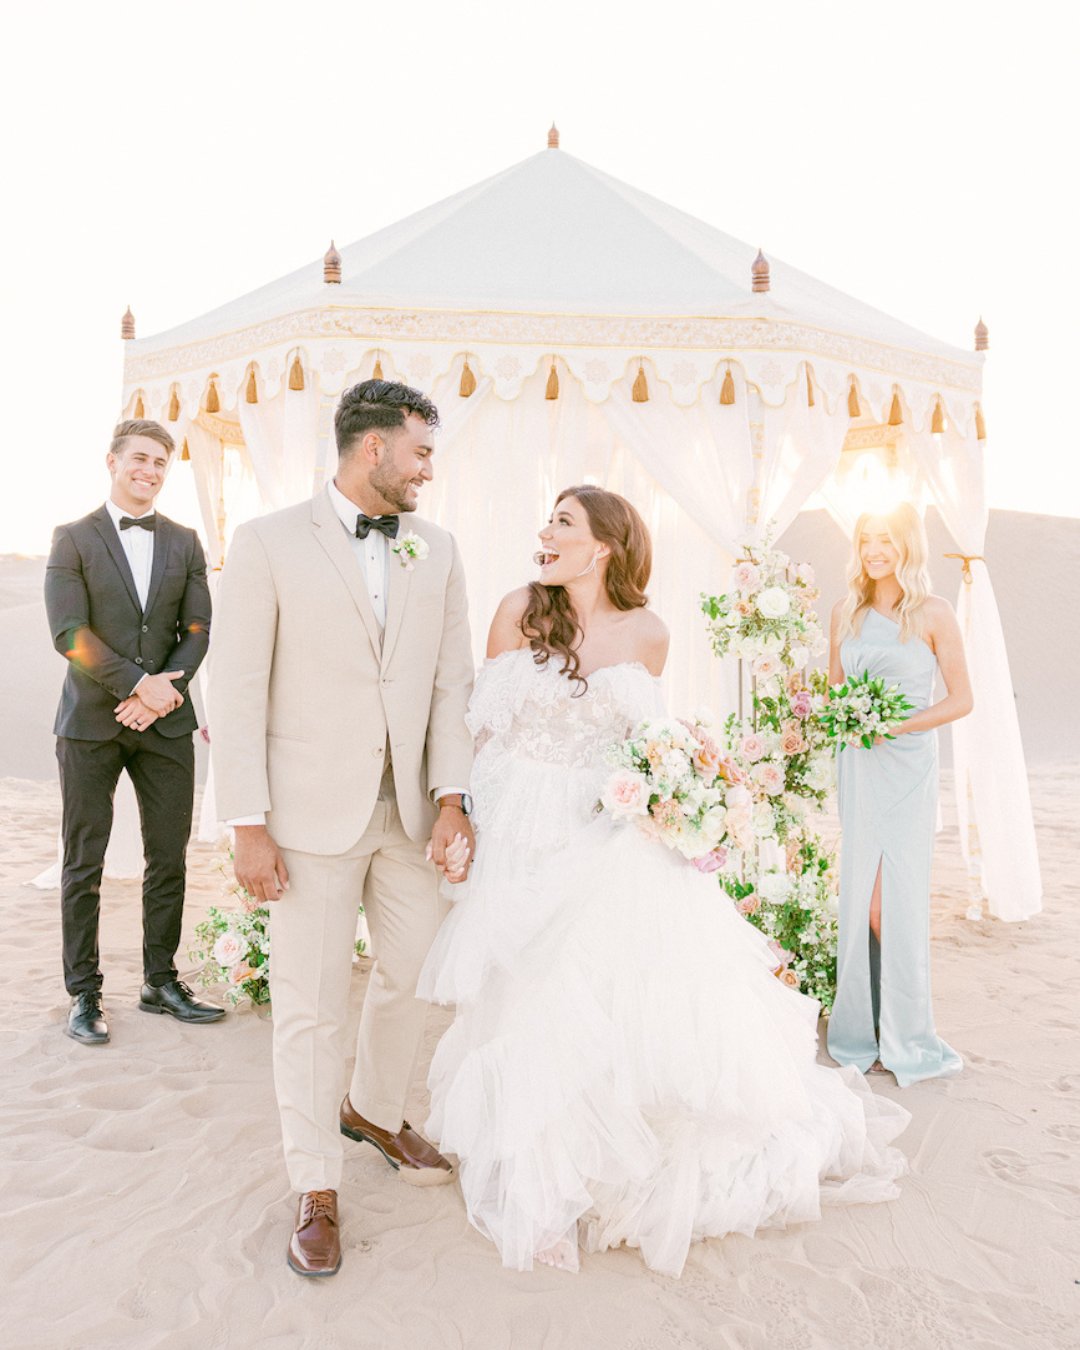 Wedding couple with Best Man and Maid of Honor in desert wedding 